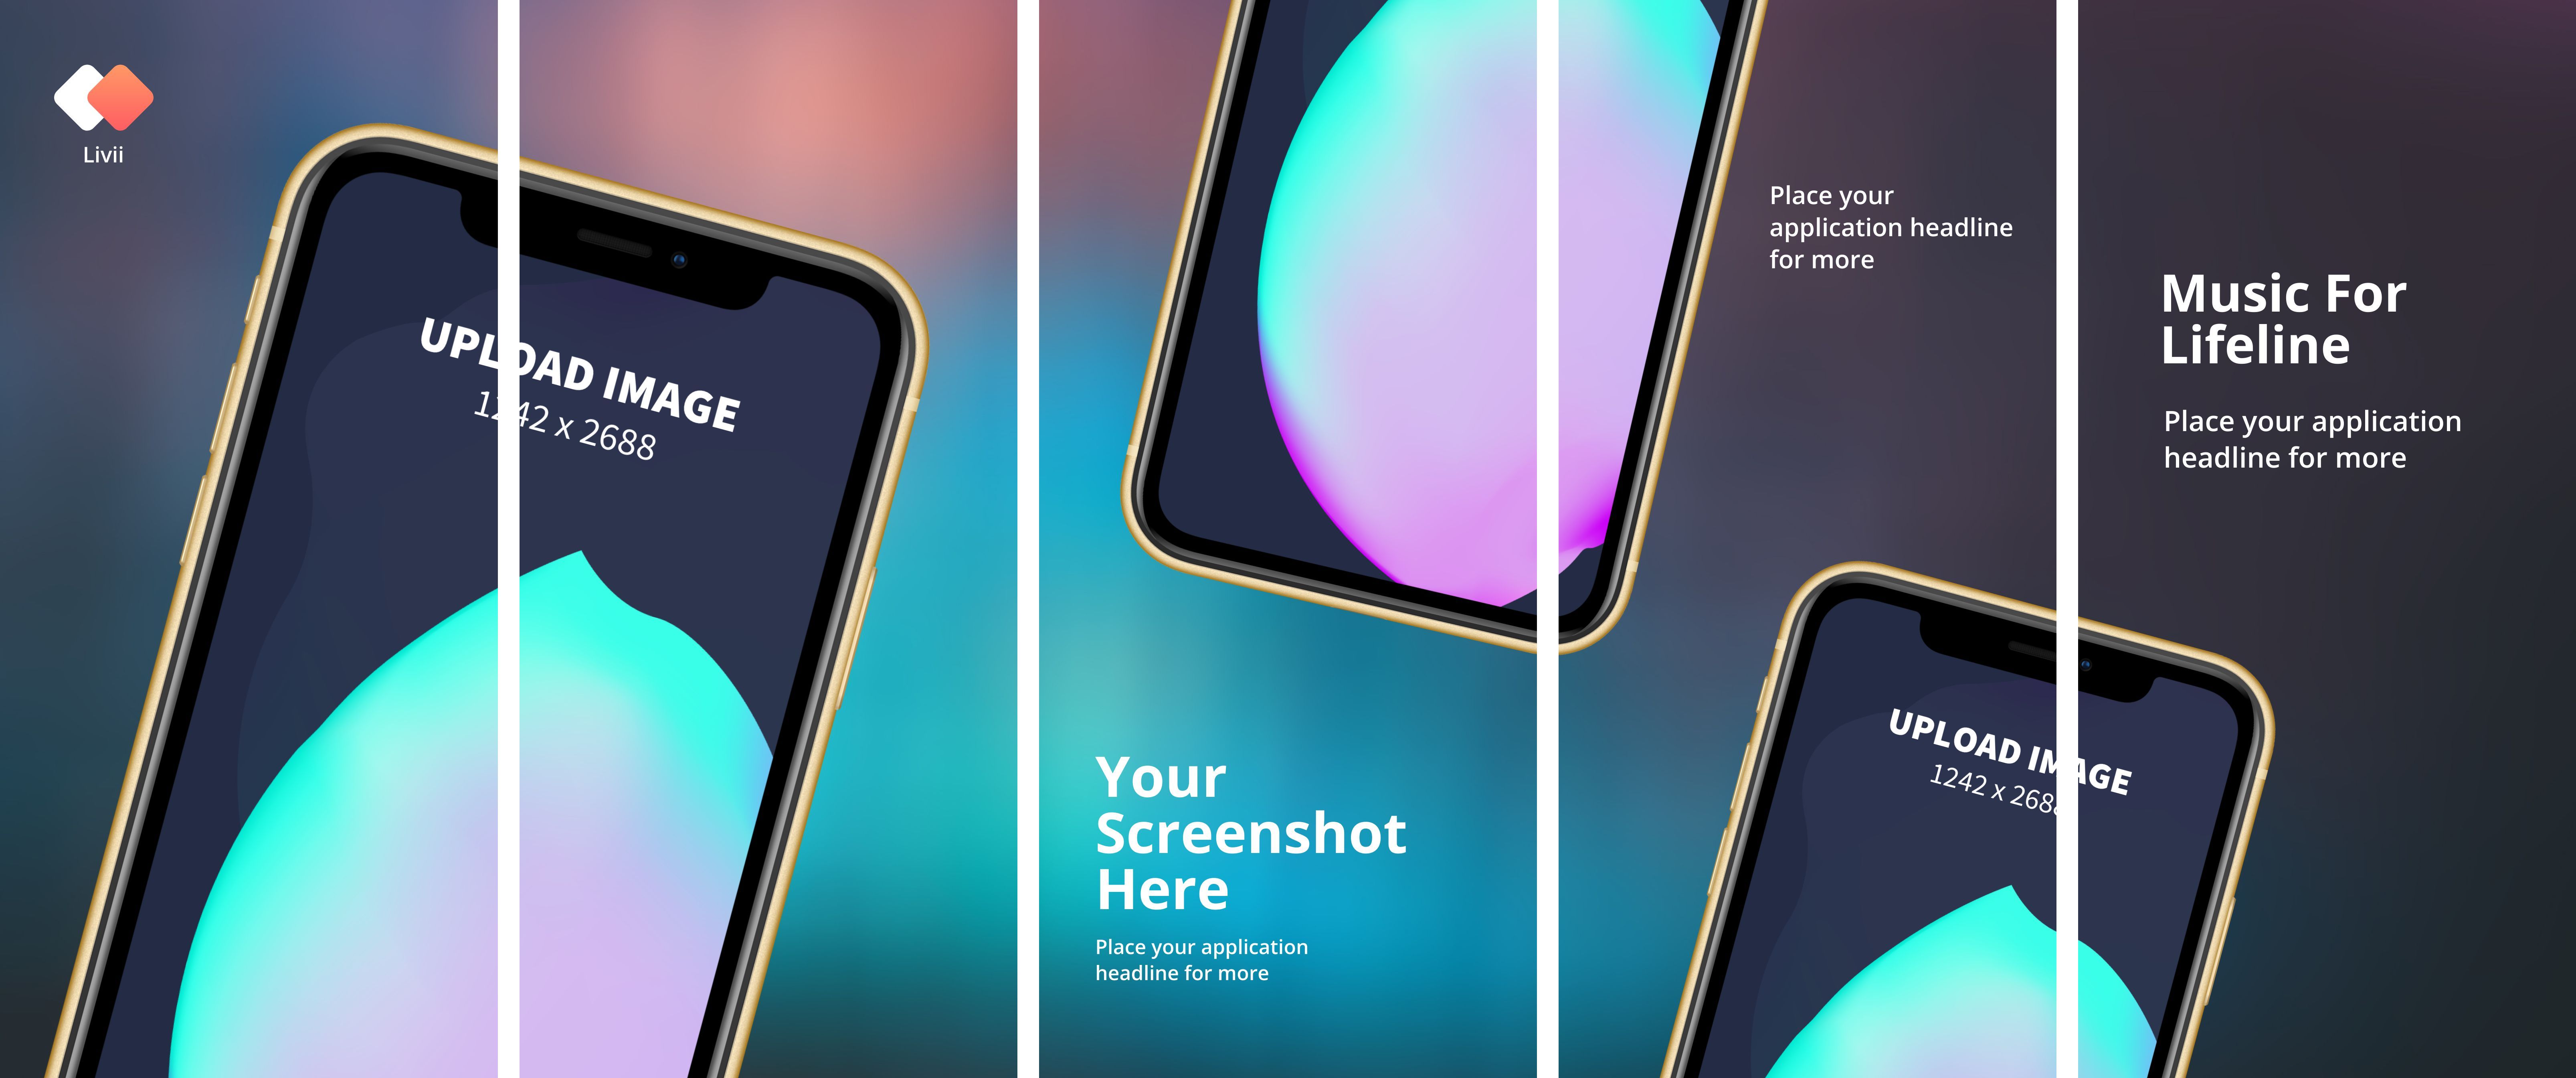 App Store Panorama Screenshot - iPhone XS Max 17 template. Quickly edit fonts, text, colors, and more for free.